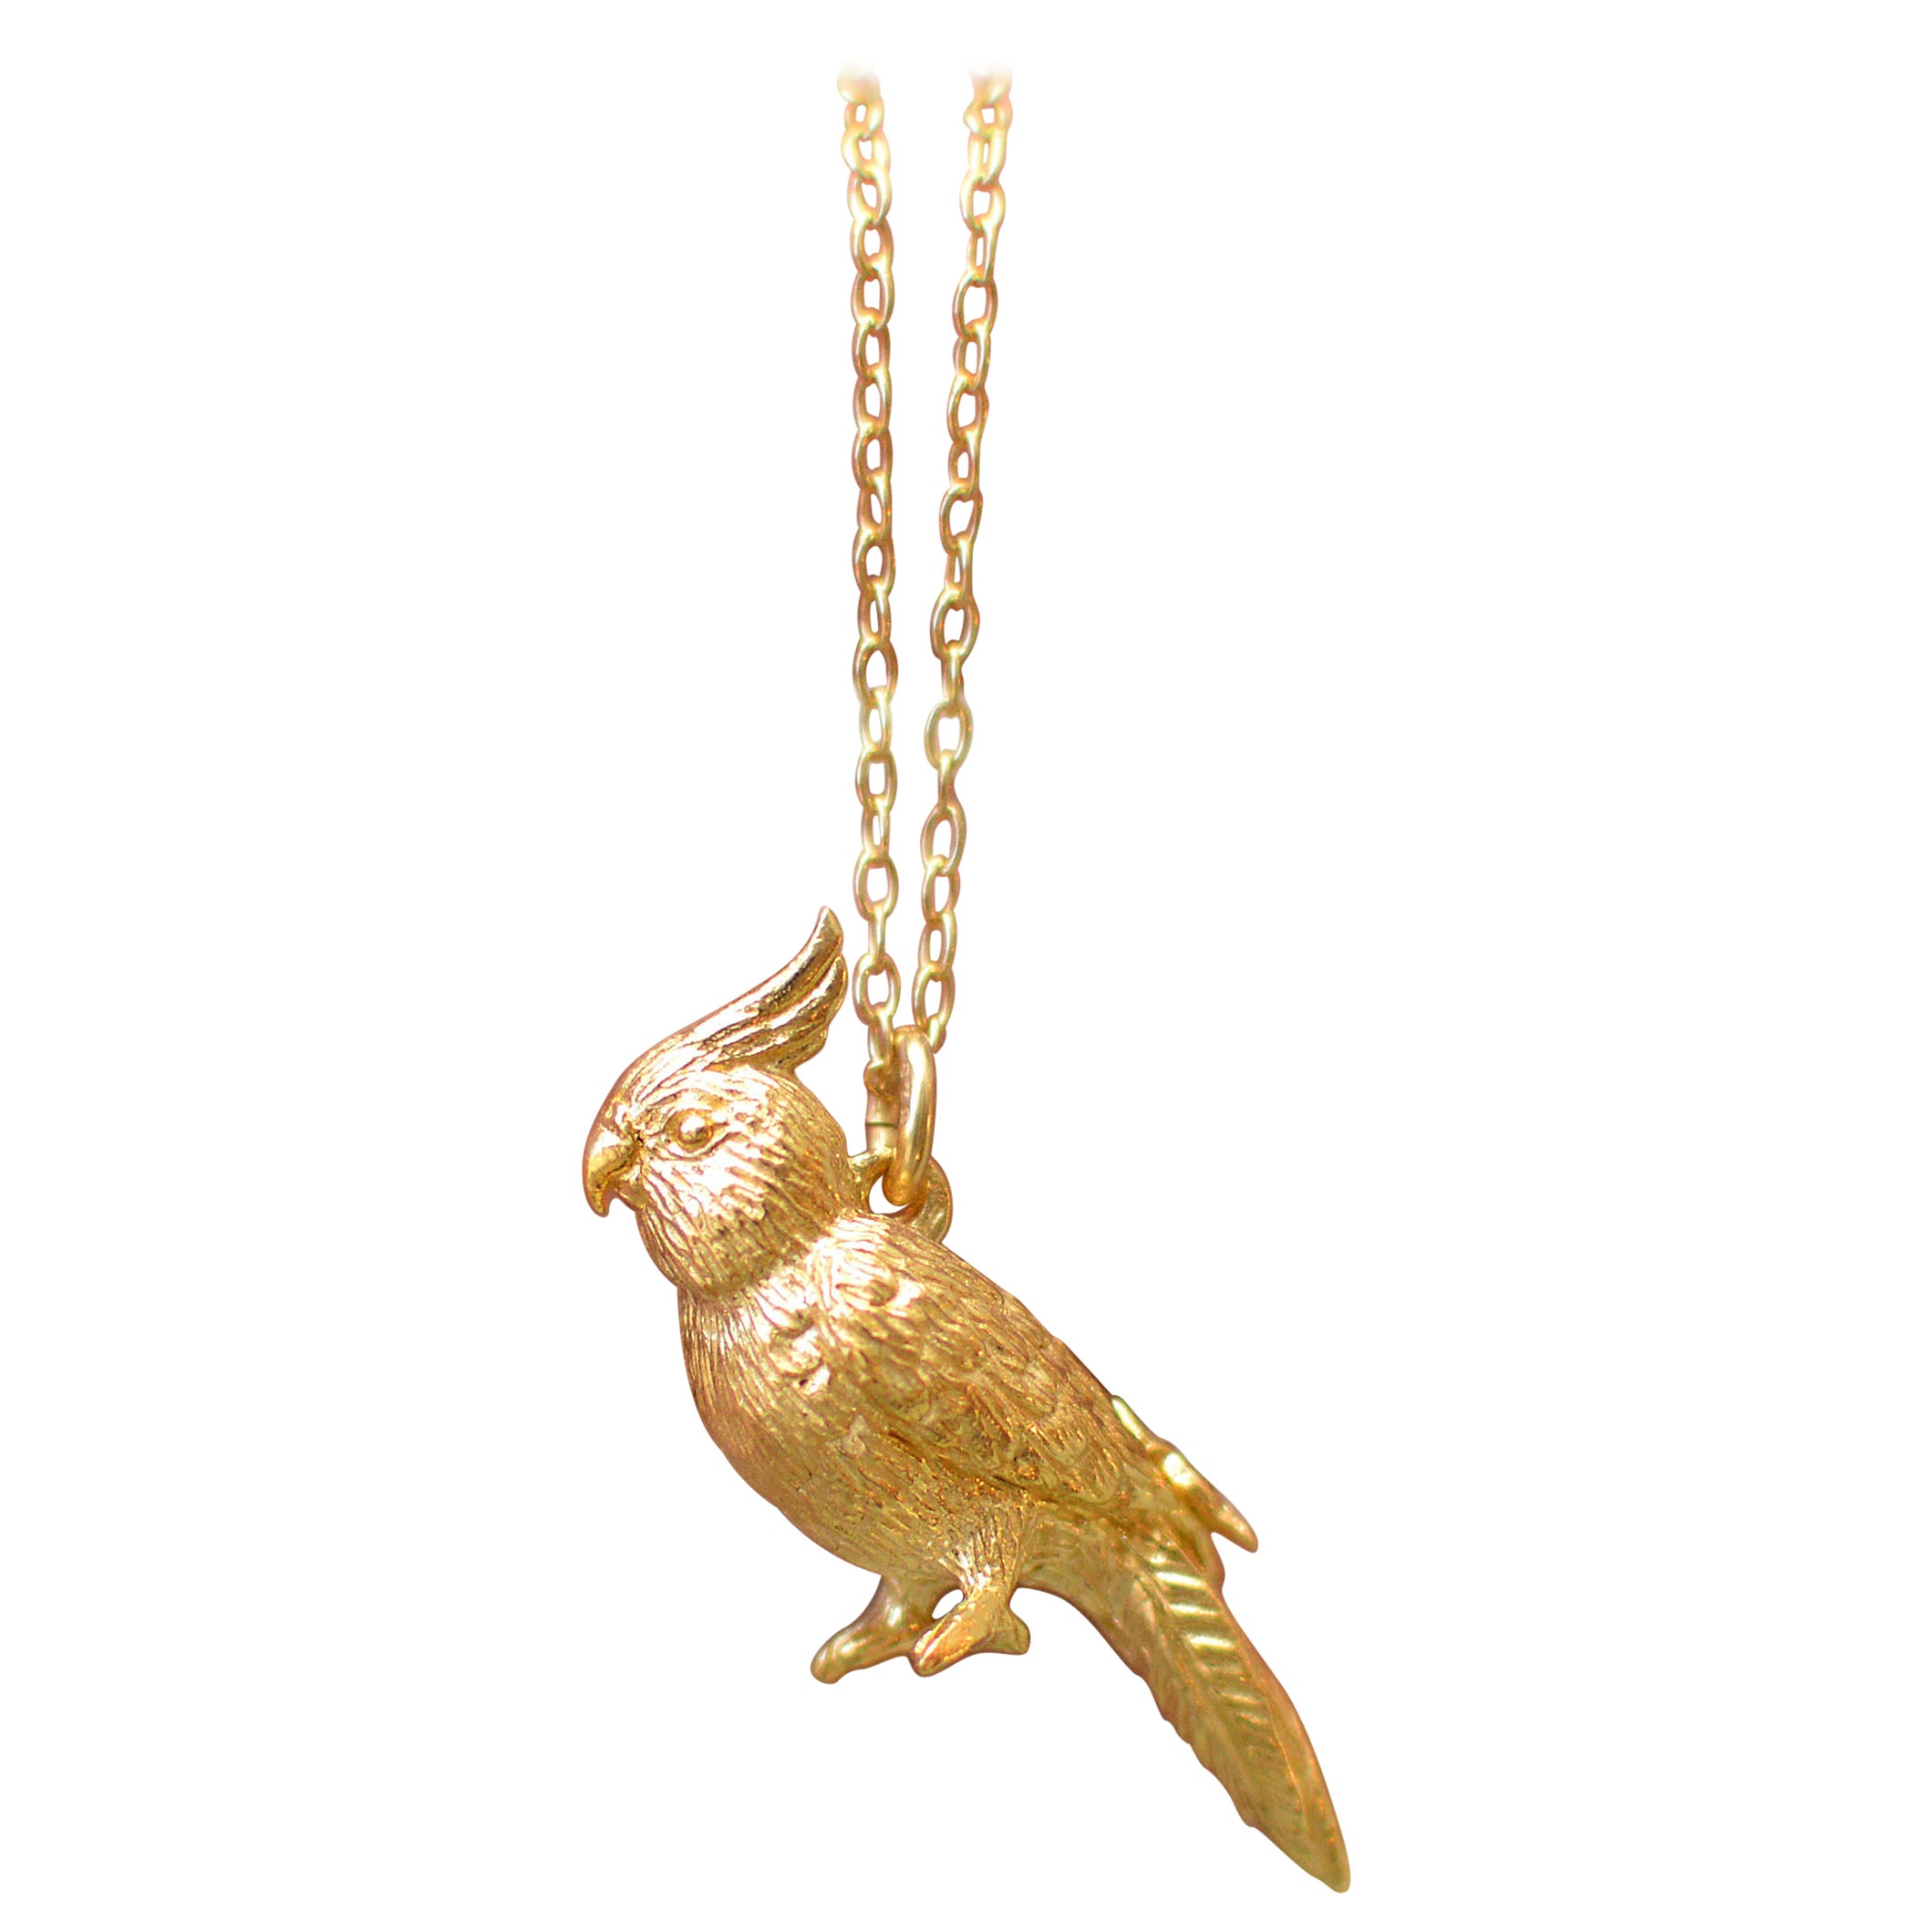 Solid 18 Carat Gold Cockatiel Pendant by Lucy Stopes-Roe For Sale